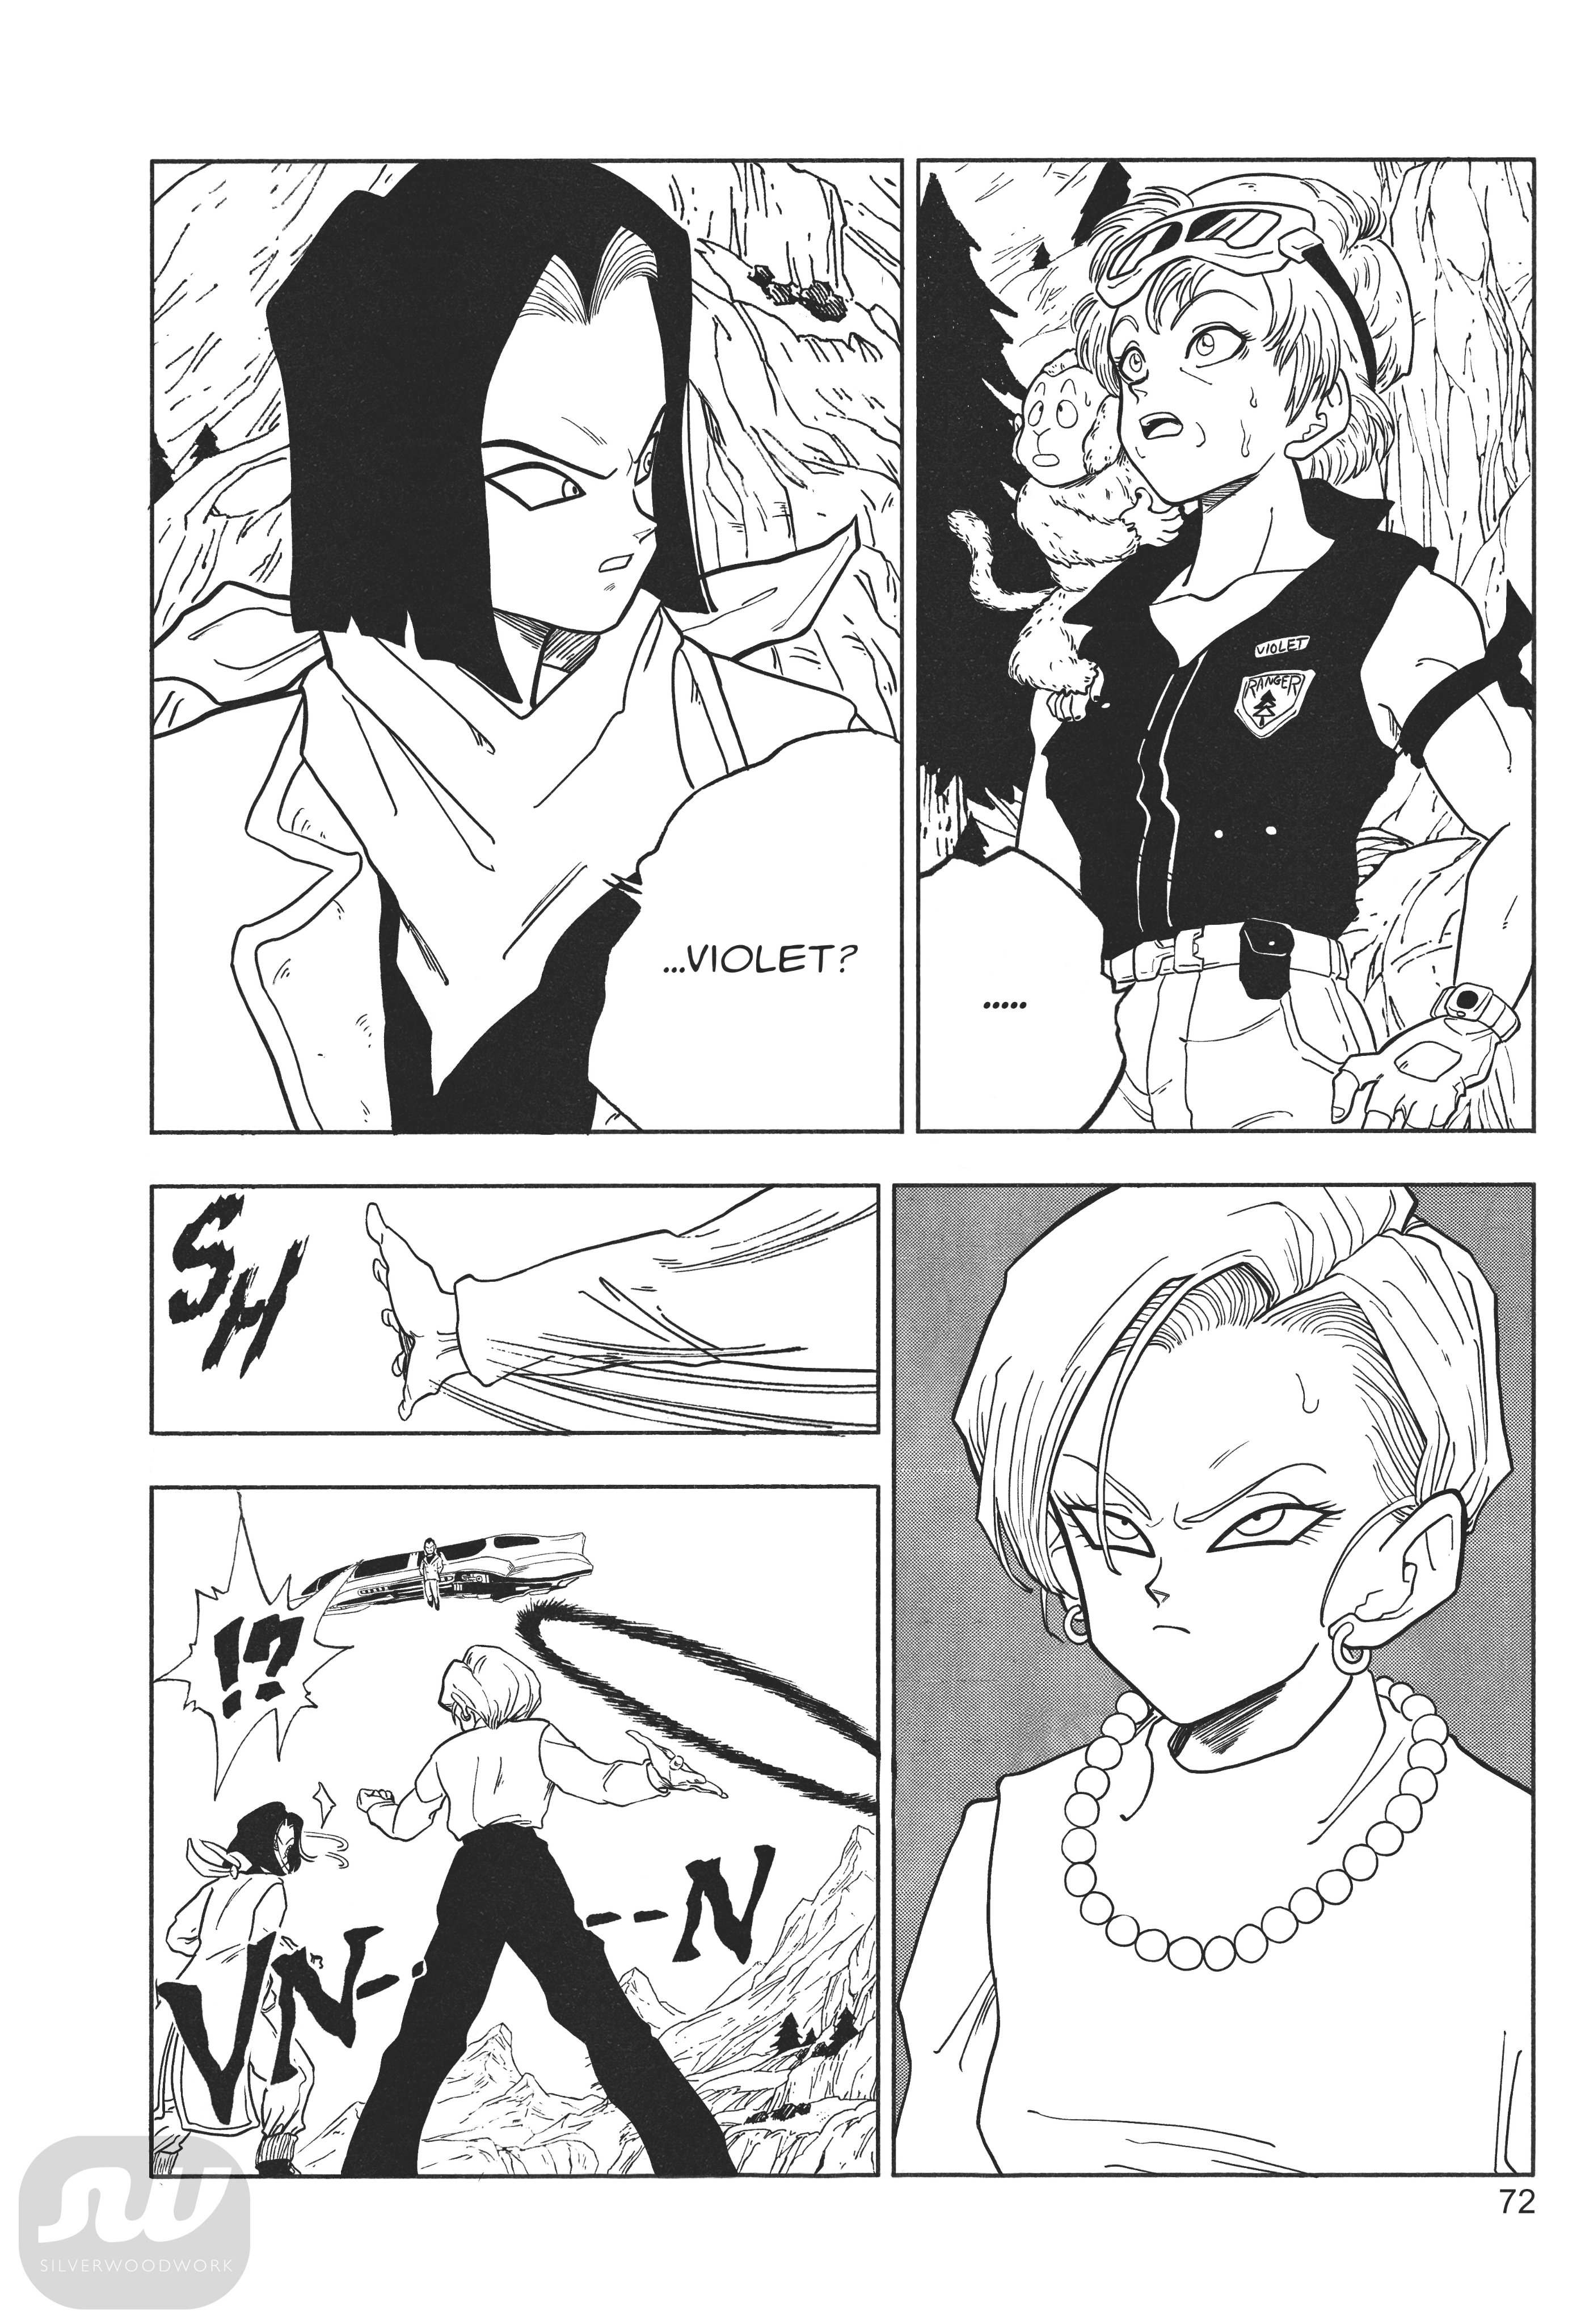 silverwood. — Android 22 in Dragon Ball Fighterz! Original